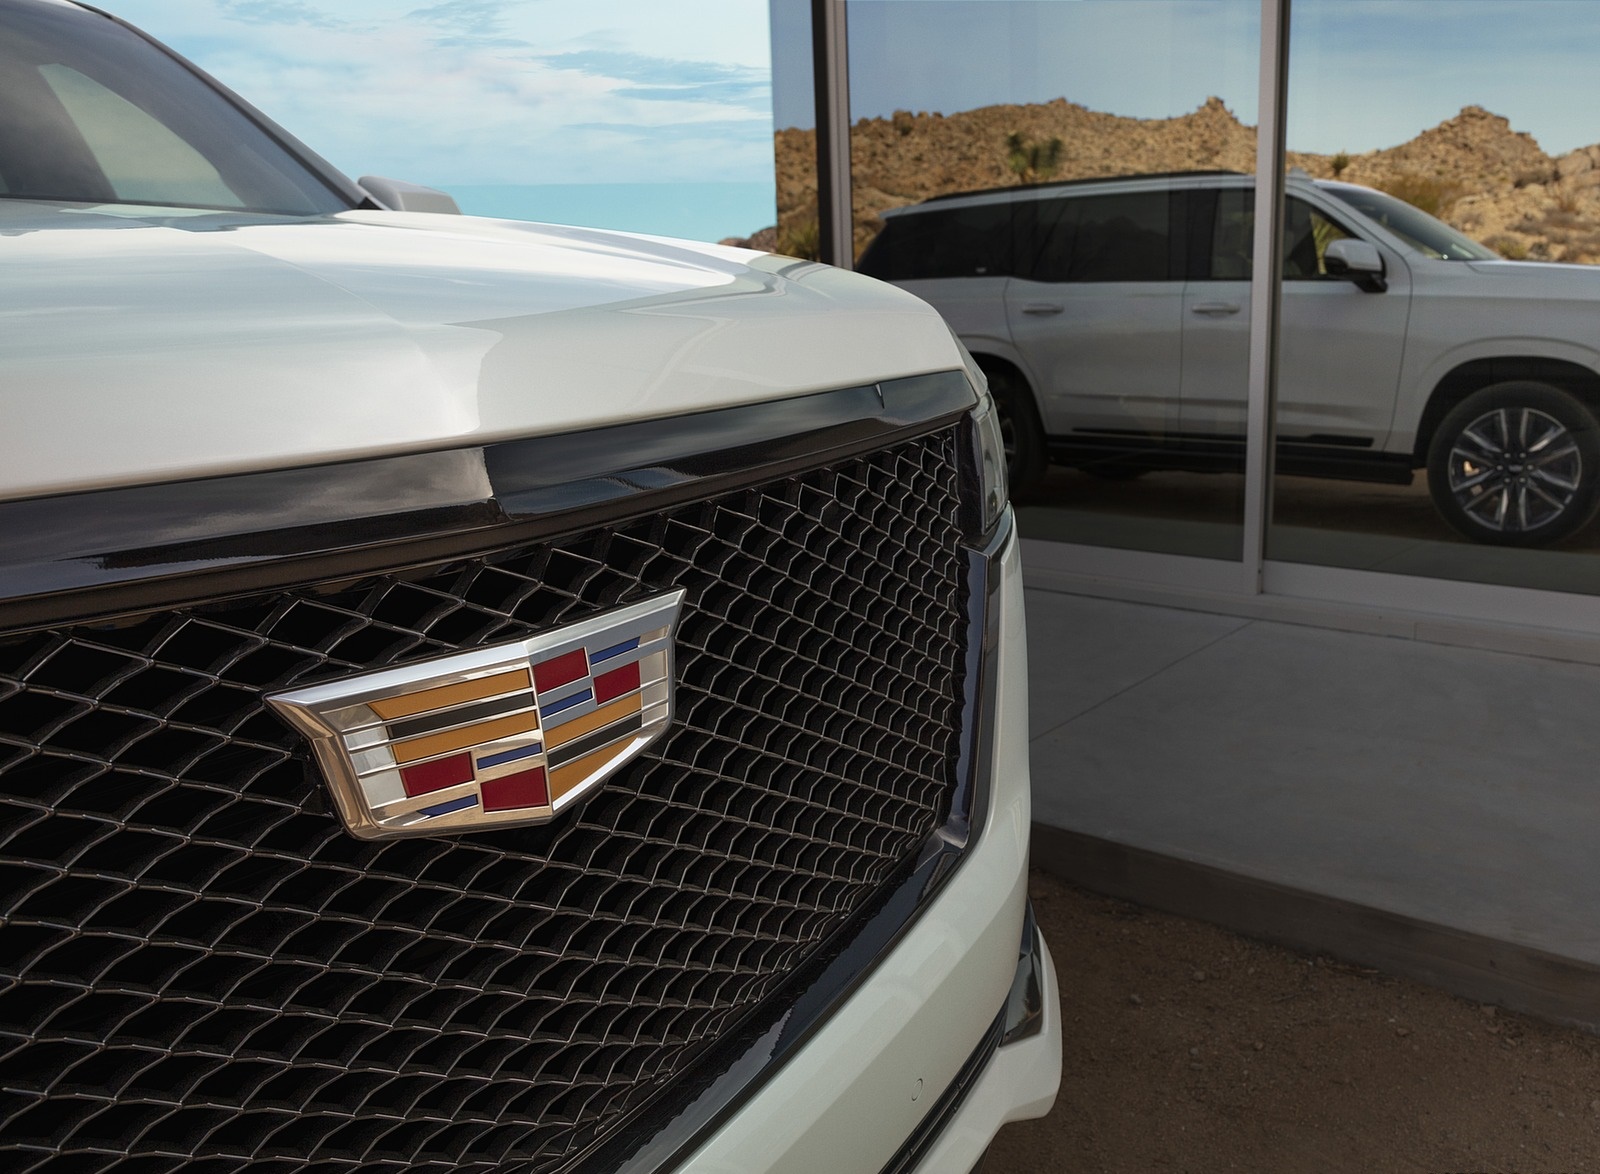 2021 Cadillac Escalade Grill Wallpapers #18 of 100